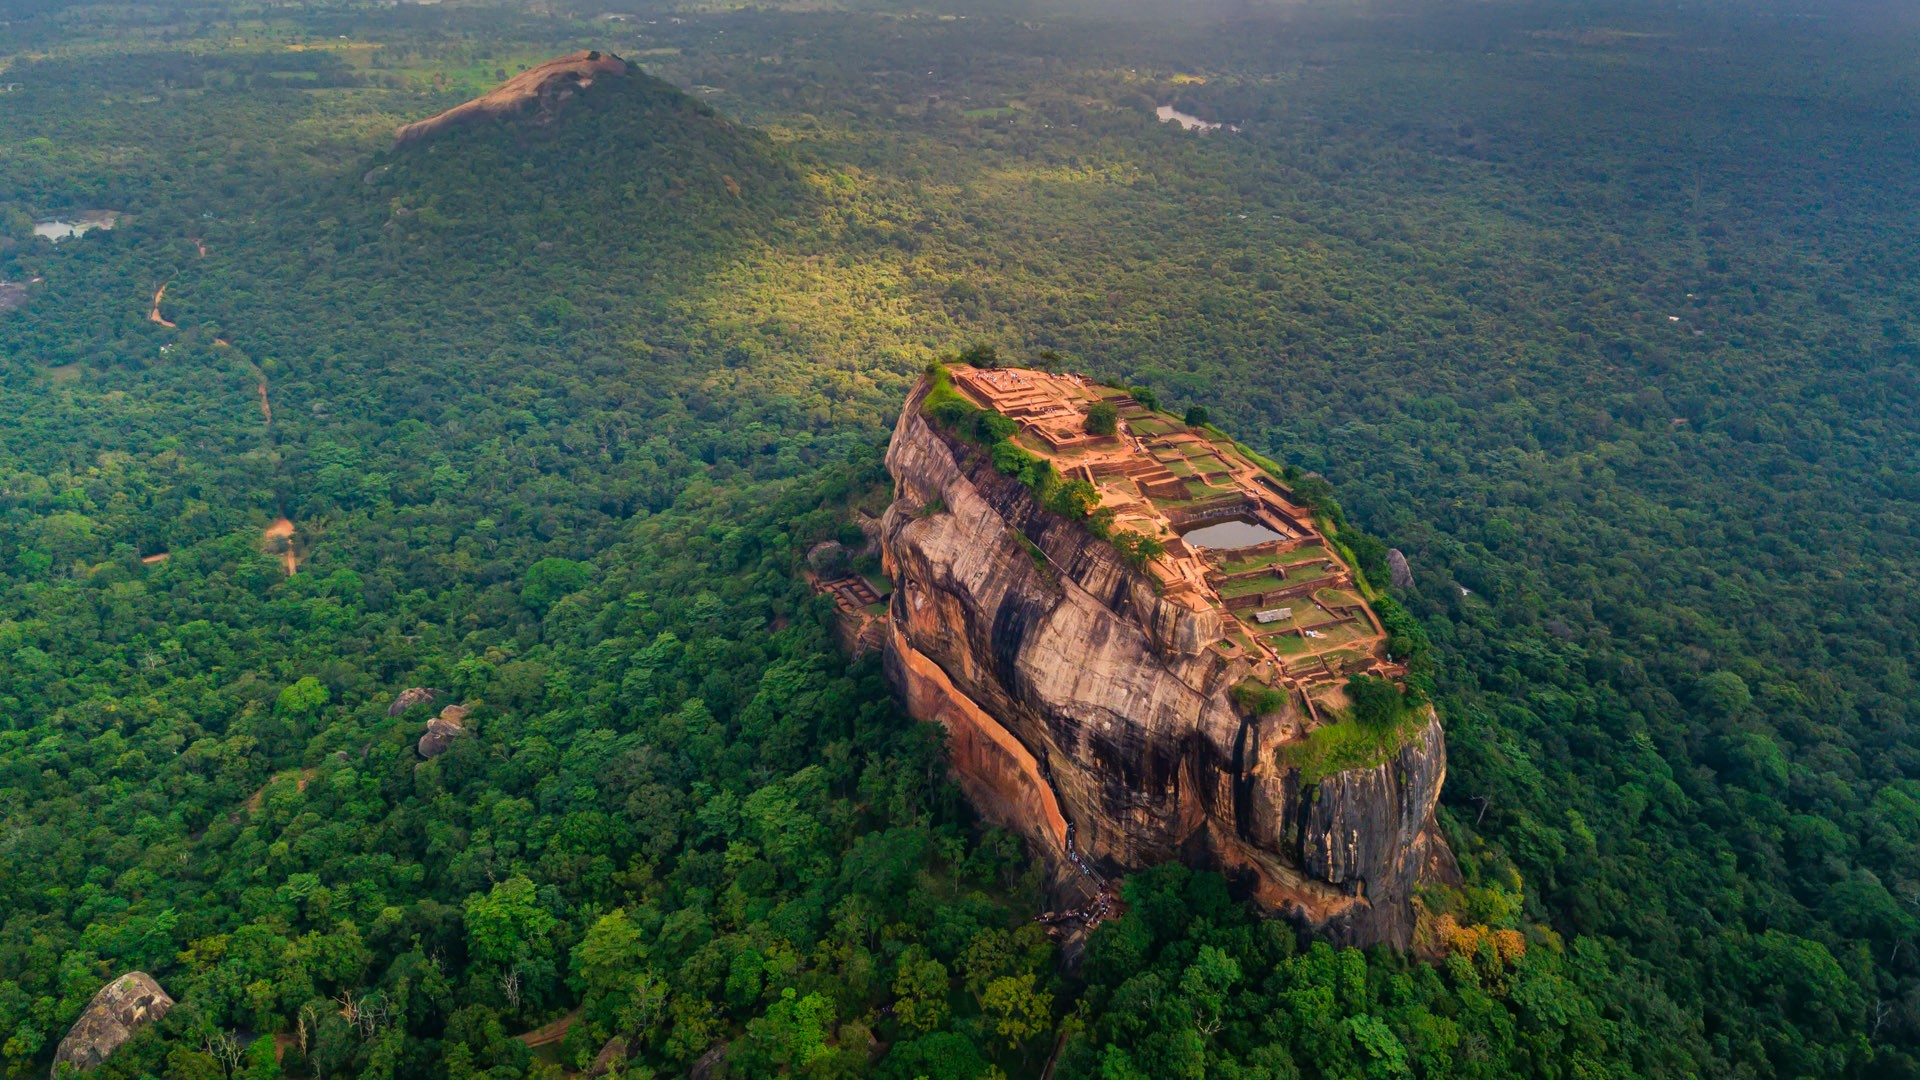 General 1920x1080 nature mountains jungle rainforest trees aerial view forest Sri Lanka